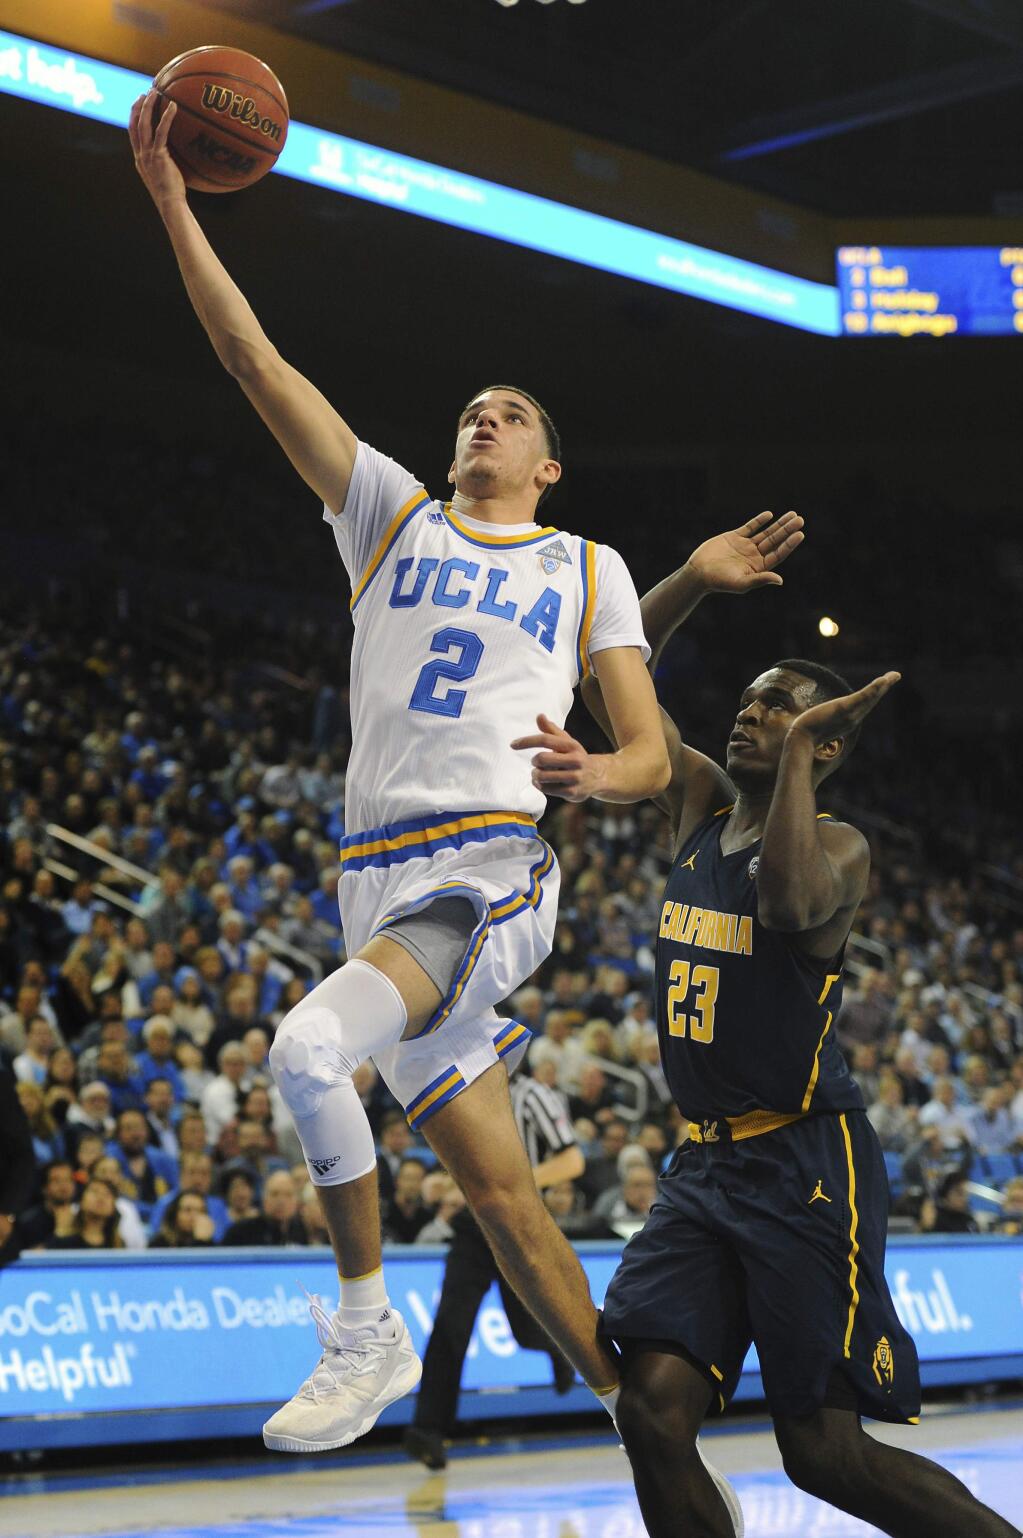 UCLA guard Lonzo Ball goes for a fast break past California's Jabari Bird during the first half of an NCAA college basketball game in Los Angeles, Thursday, Jan. 5, 2017. (AP Photo/Michael Owen Baker)